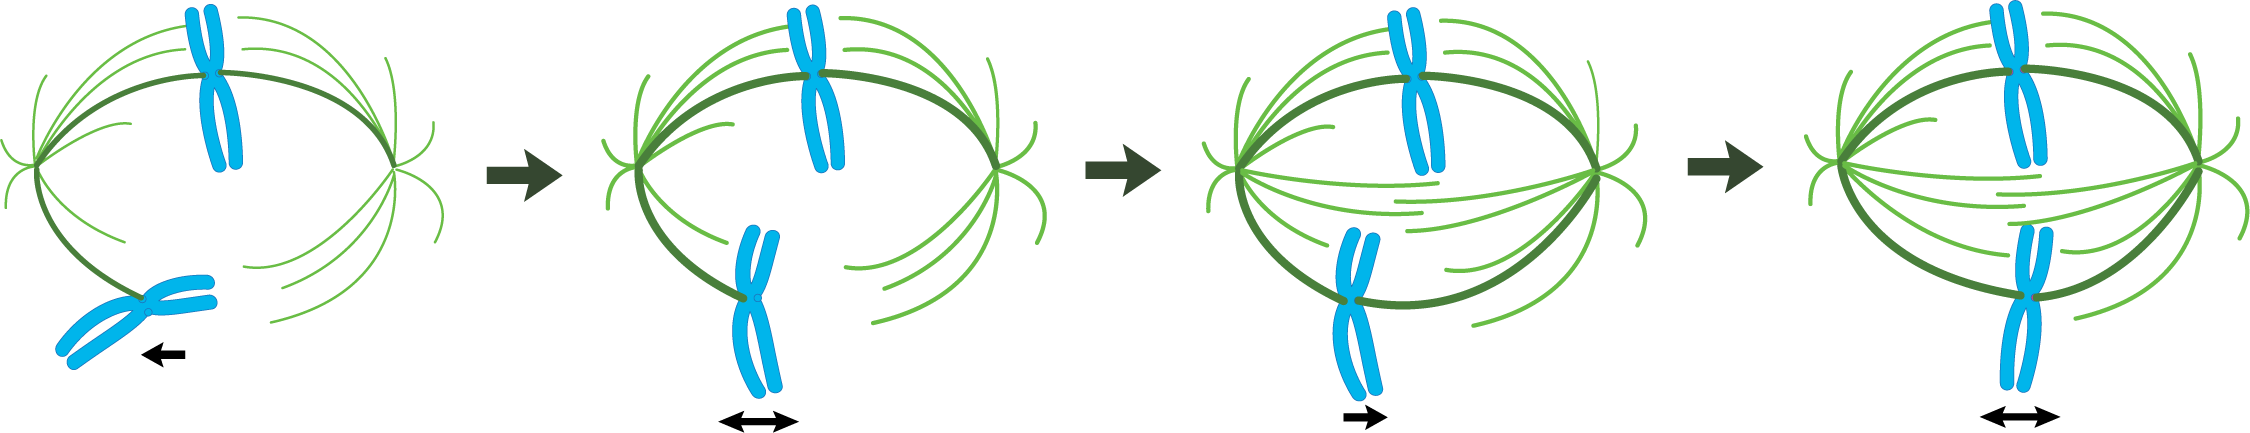 Microtubules forming the mitotic spindle